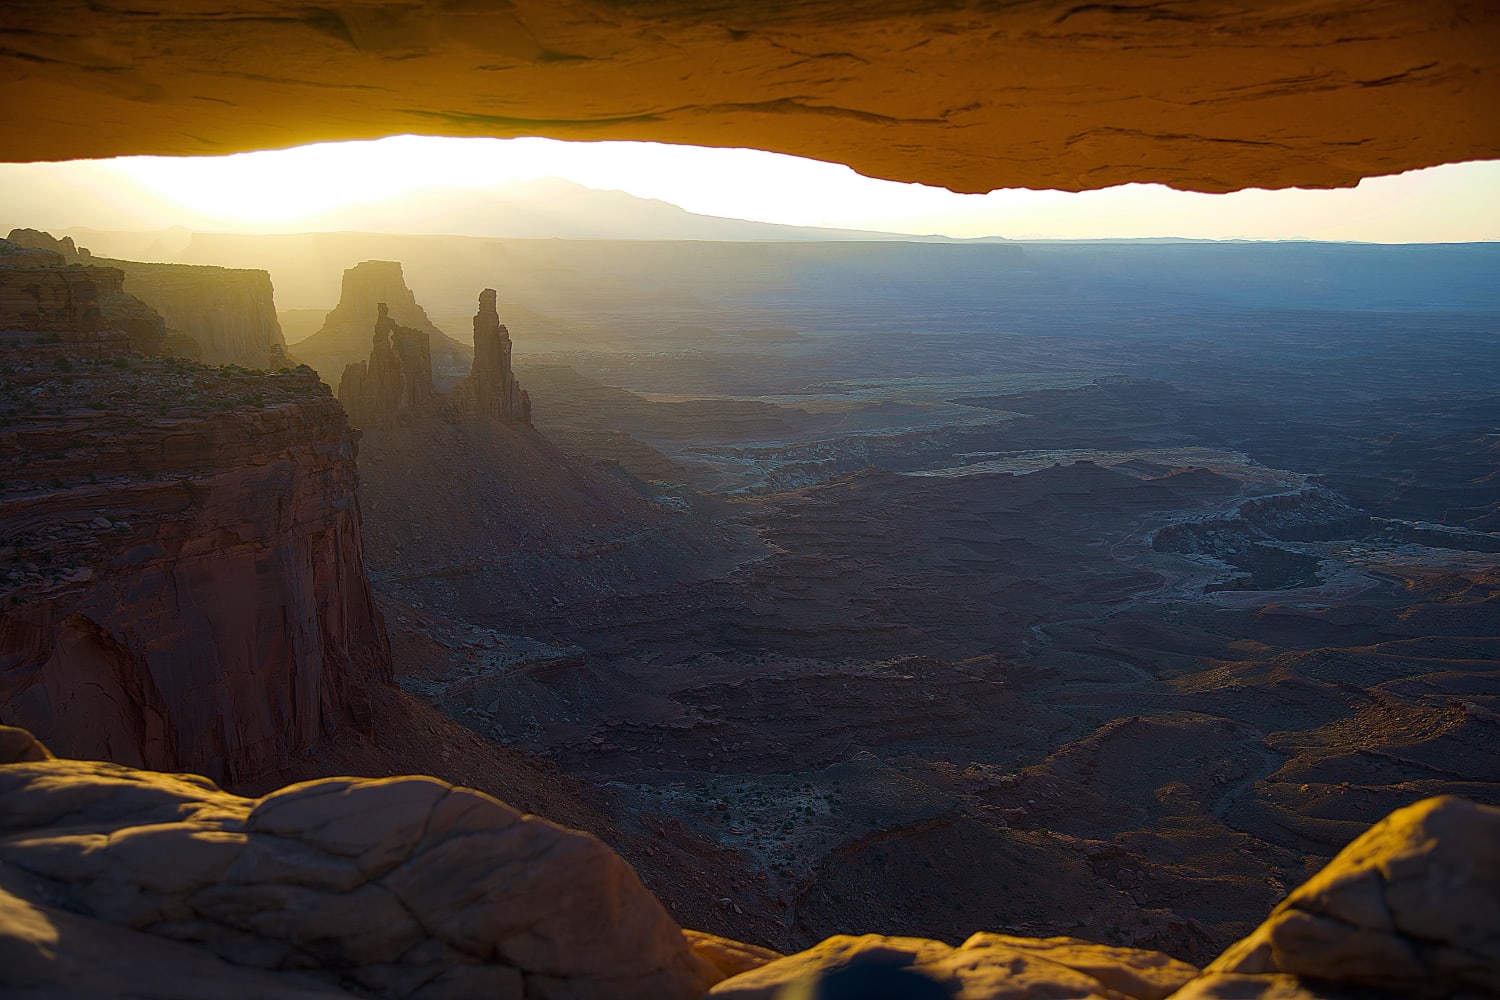 View of the washer woman. Canyonlands National Park, UT